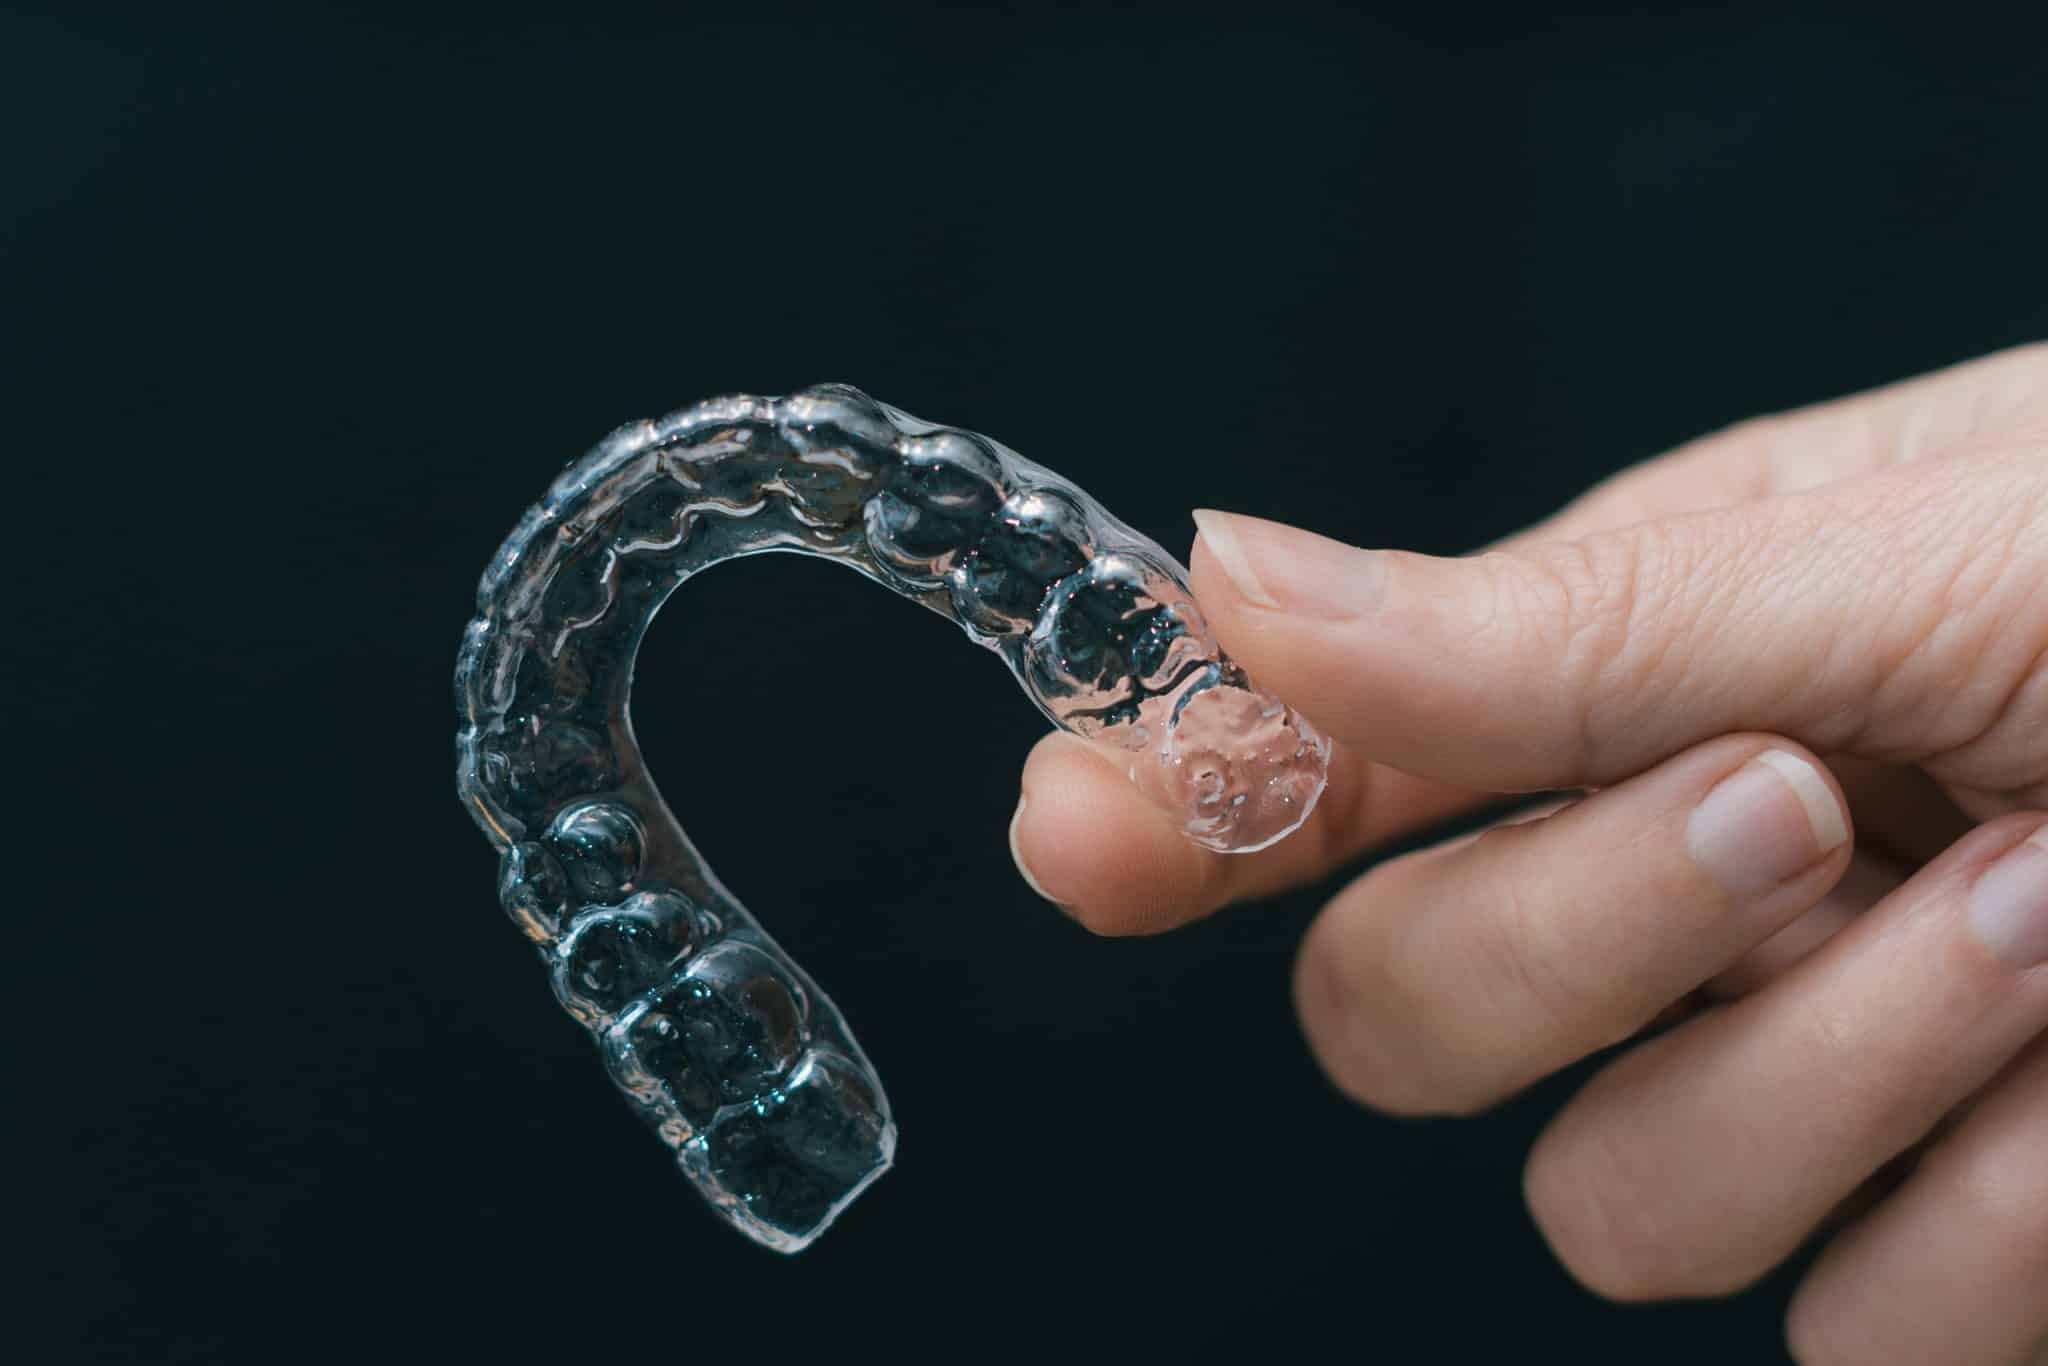 A person holding up a clear aligner, which is an orthodontic device for straightening teeth.